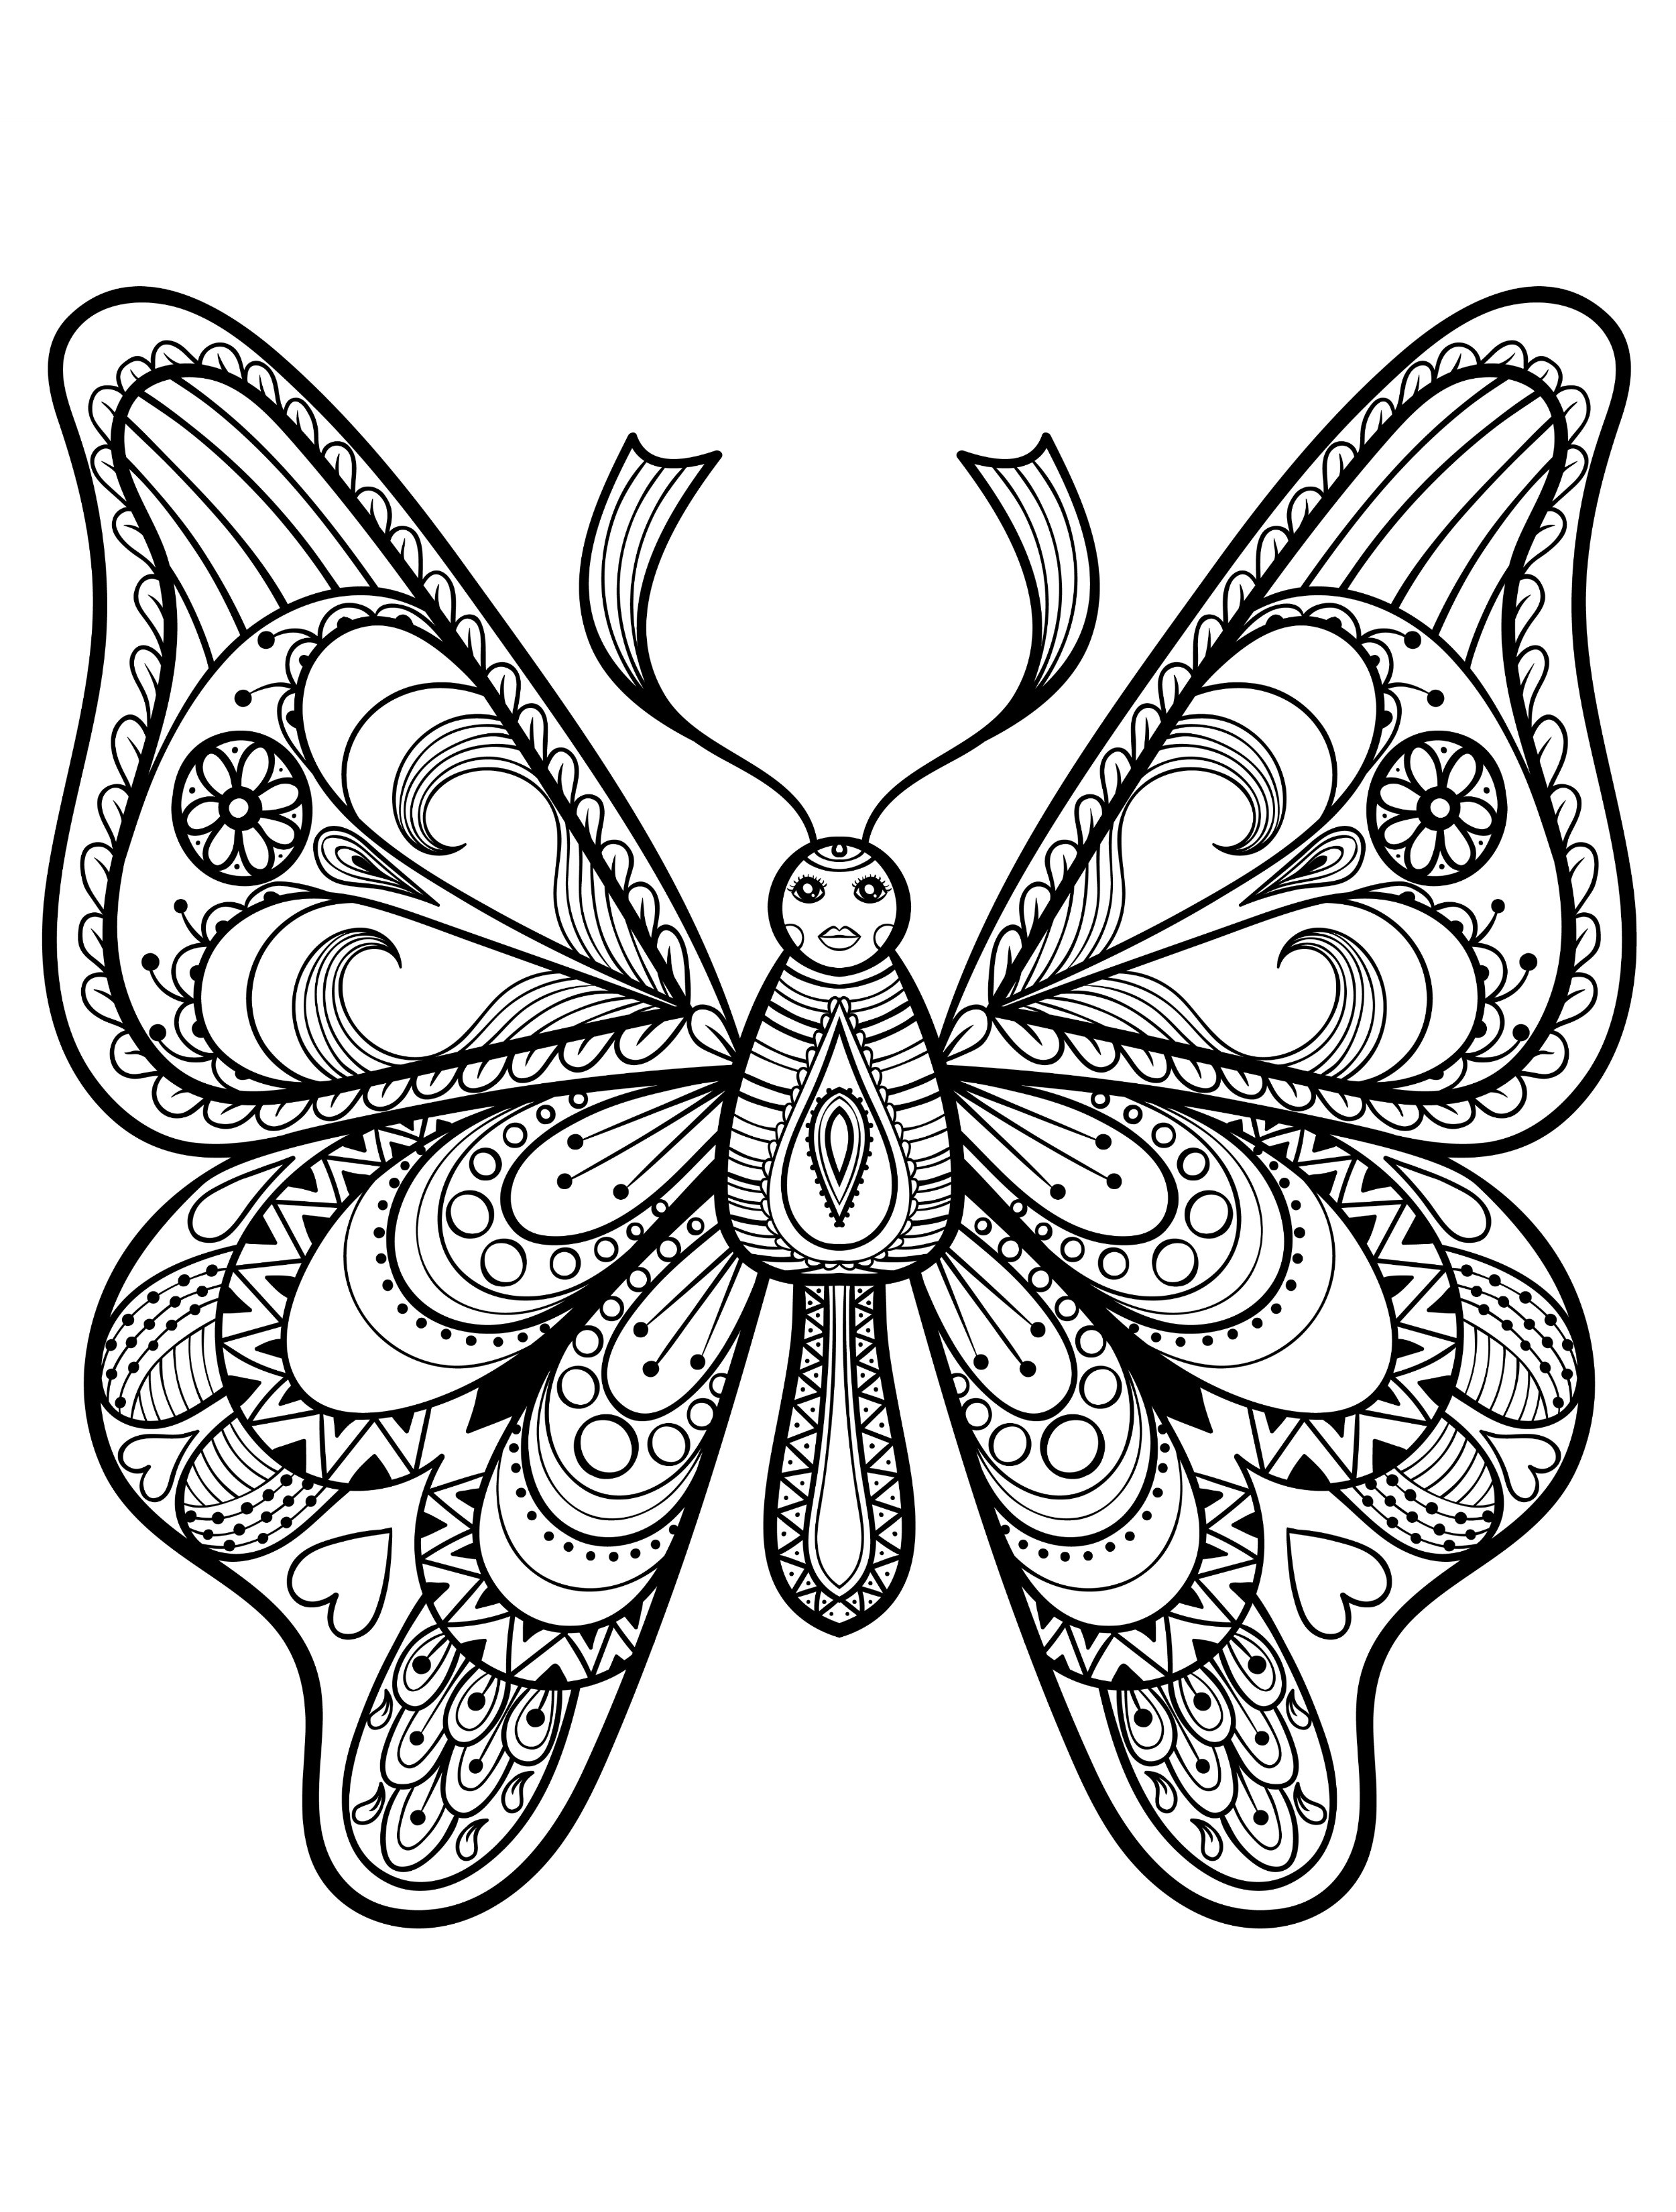 Butterfly Coloring Pages For Adults
 23 Free Printable Insect & Animal Adult Coloring Pages